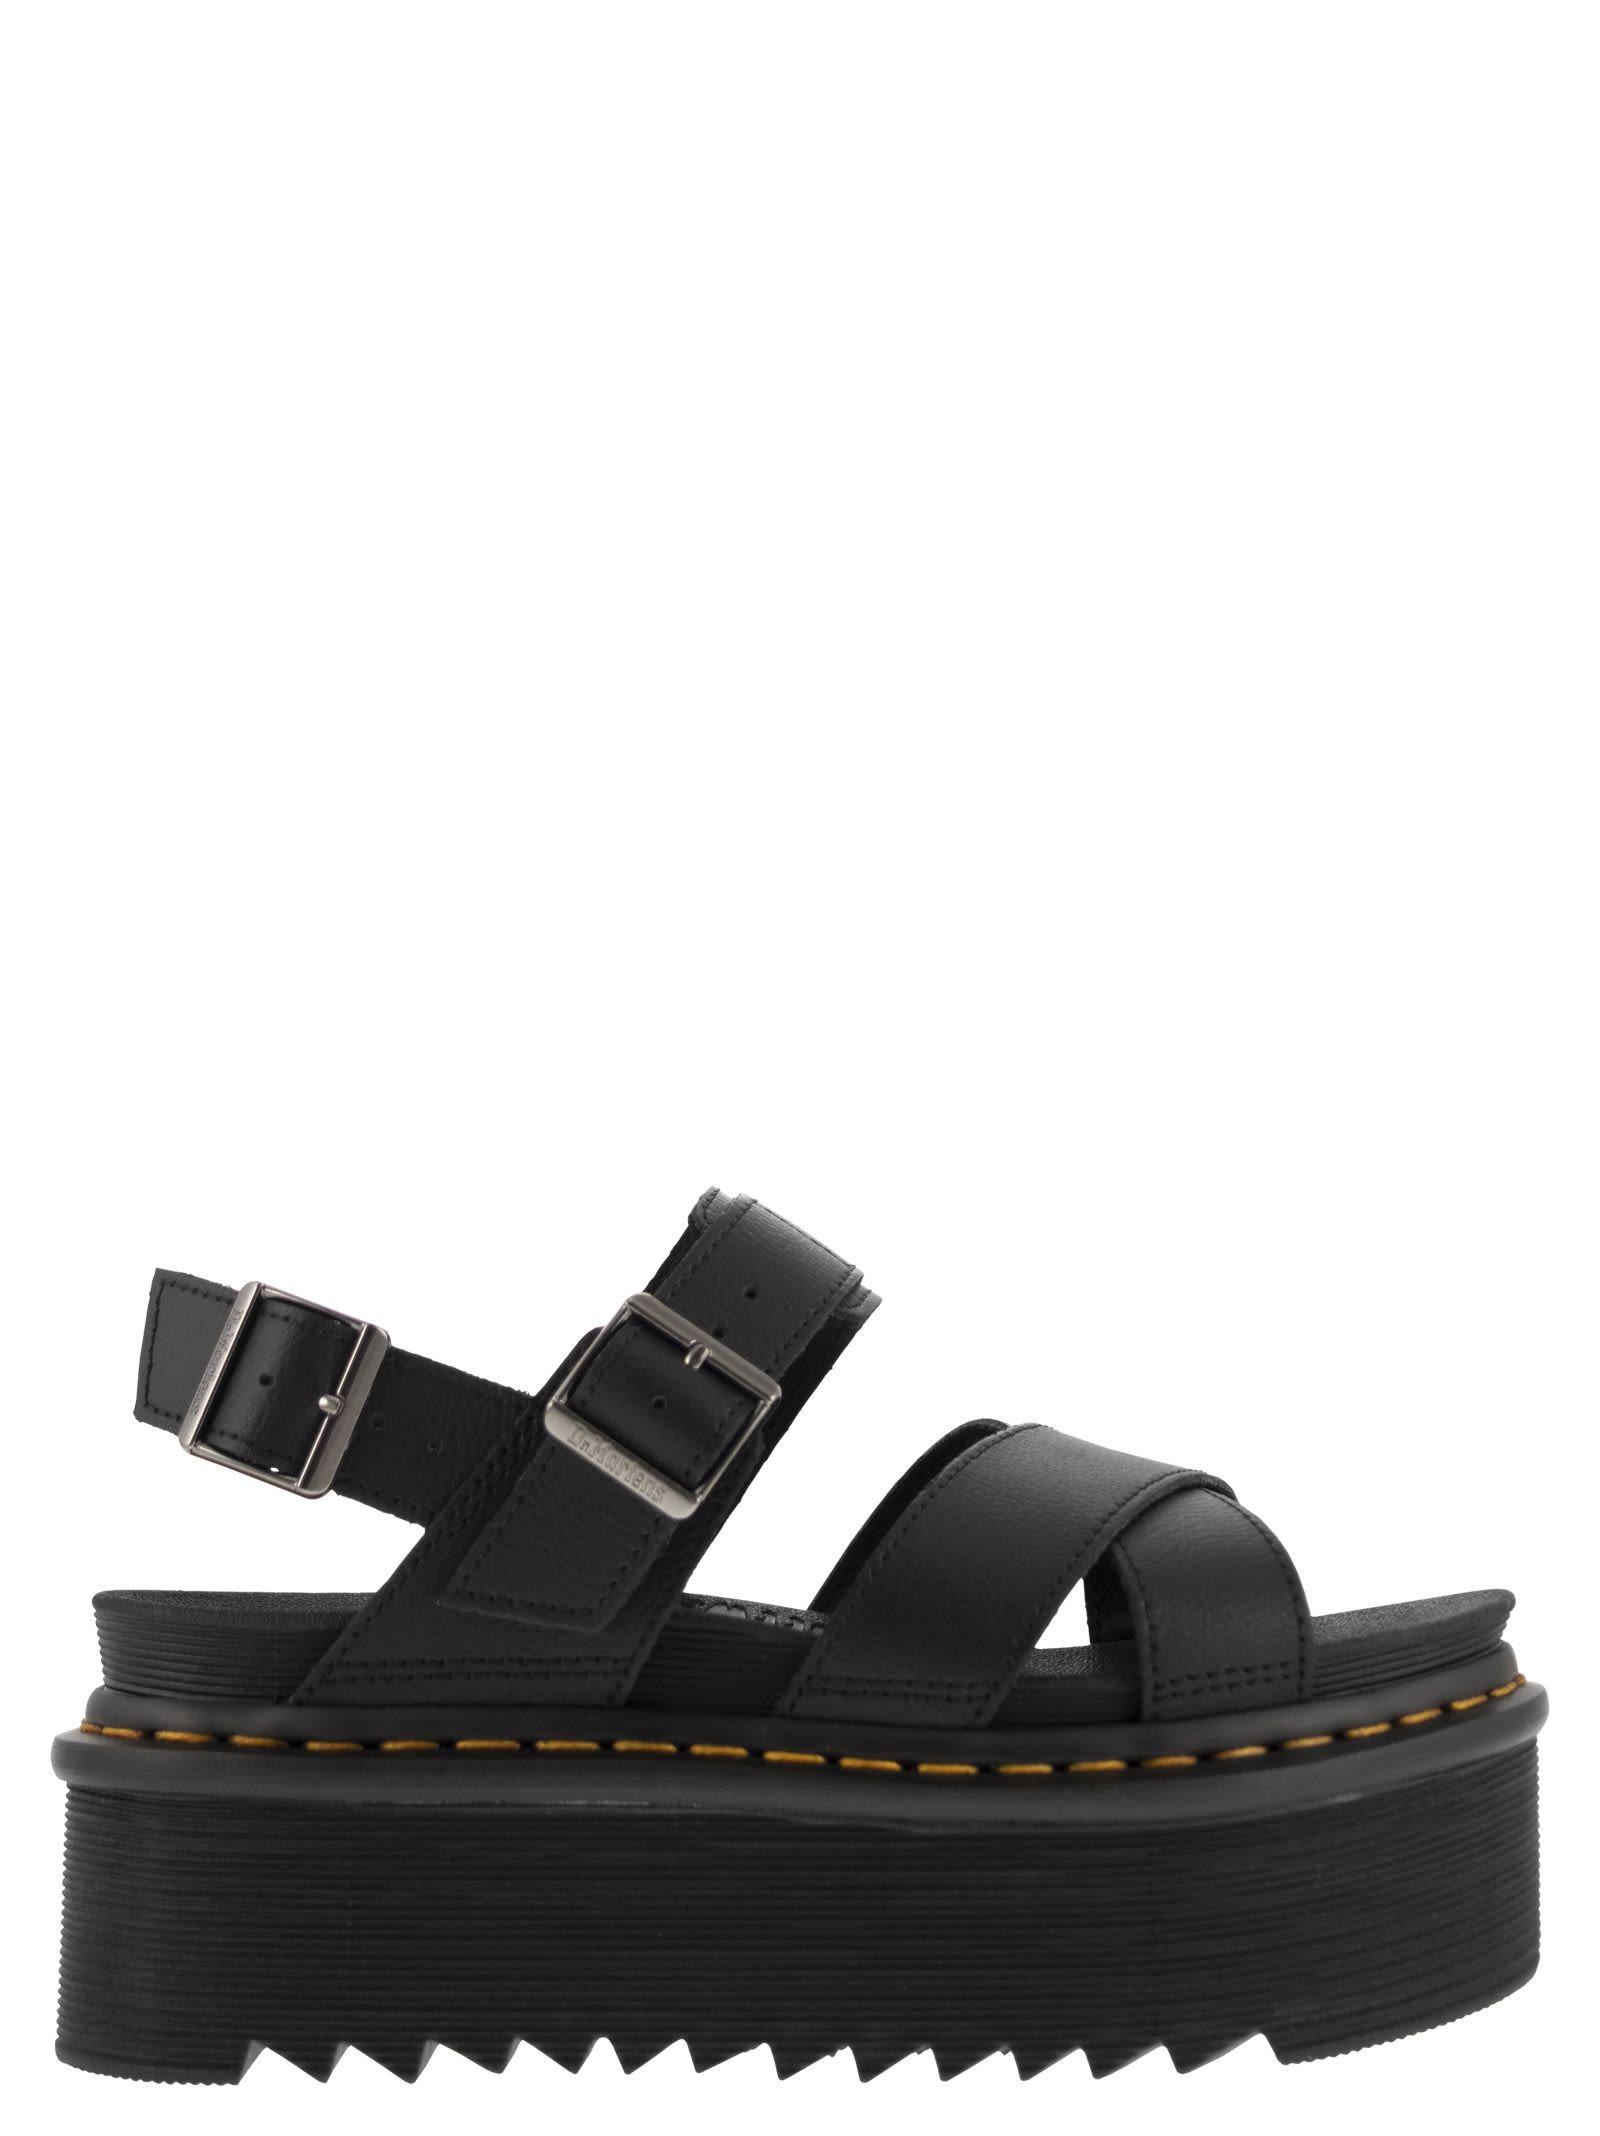 Dr. Martens Voss Ii Leather Sandals With Straps in Black | Lyst